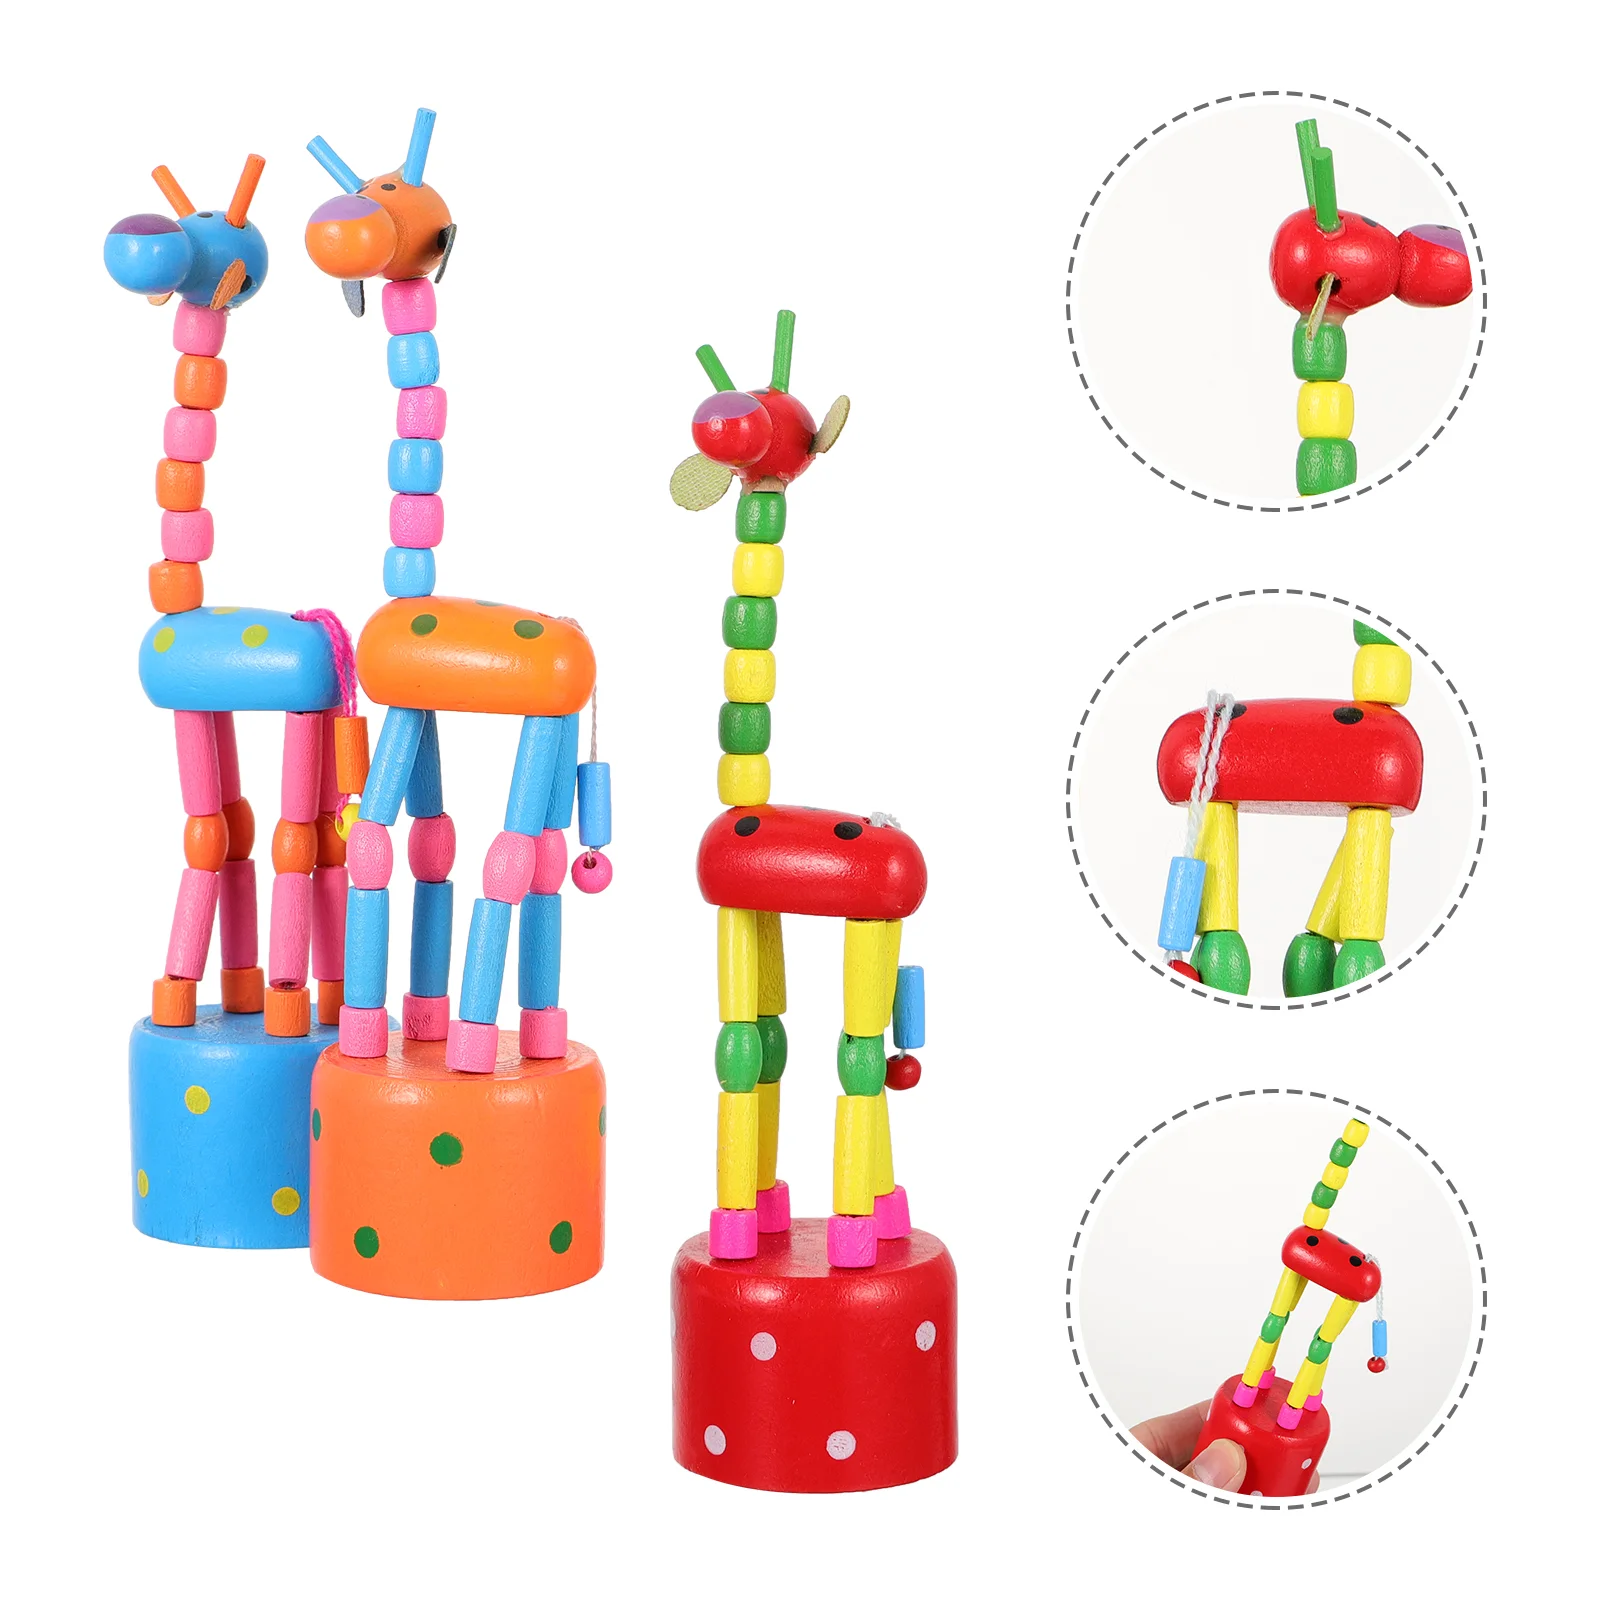 

Toy Giraffe Kids Animal Wooden Finger Puppets Dancing Party Toys Puppet Figurine Favors Wood Ornament Thumb Birthday Push